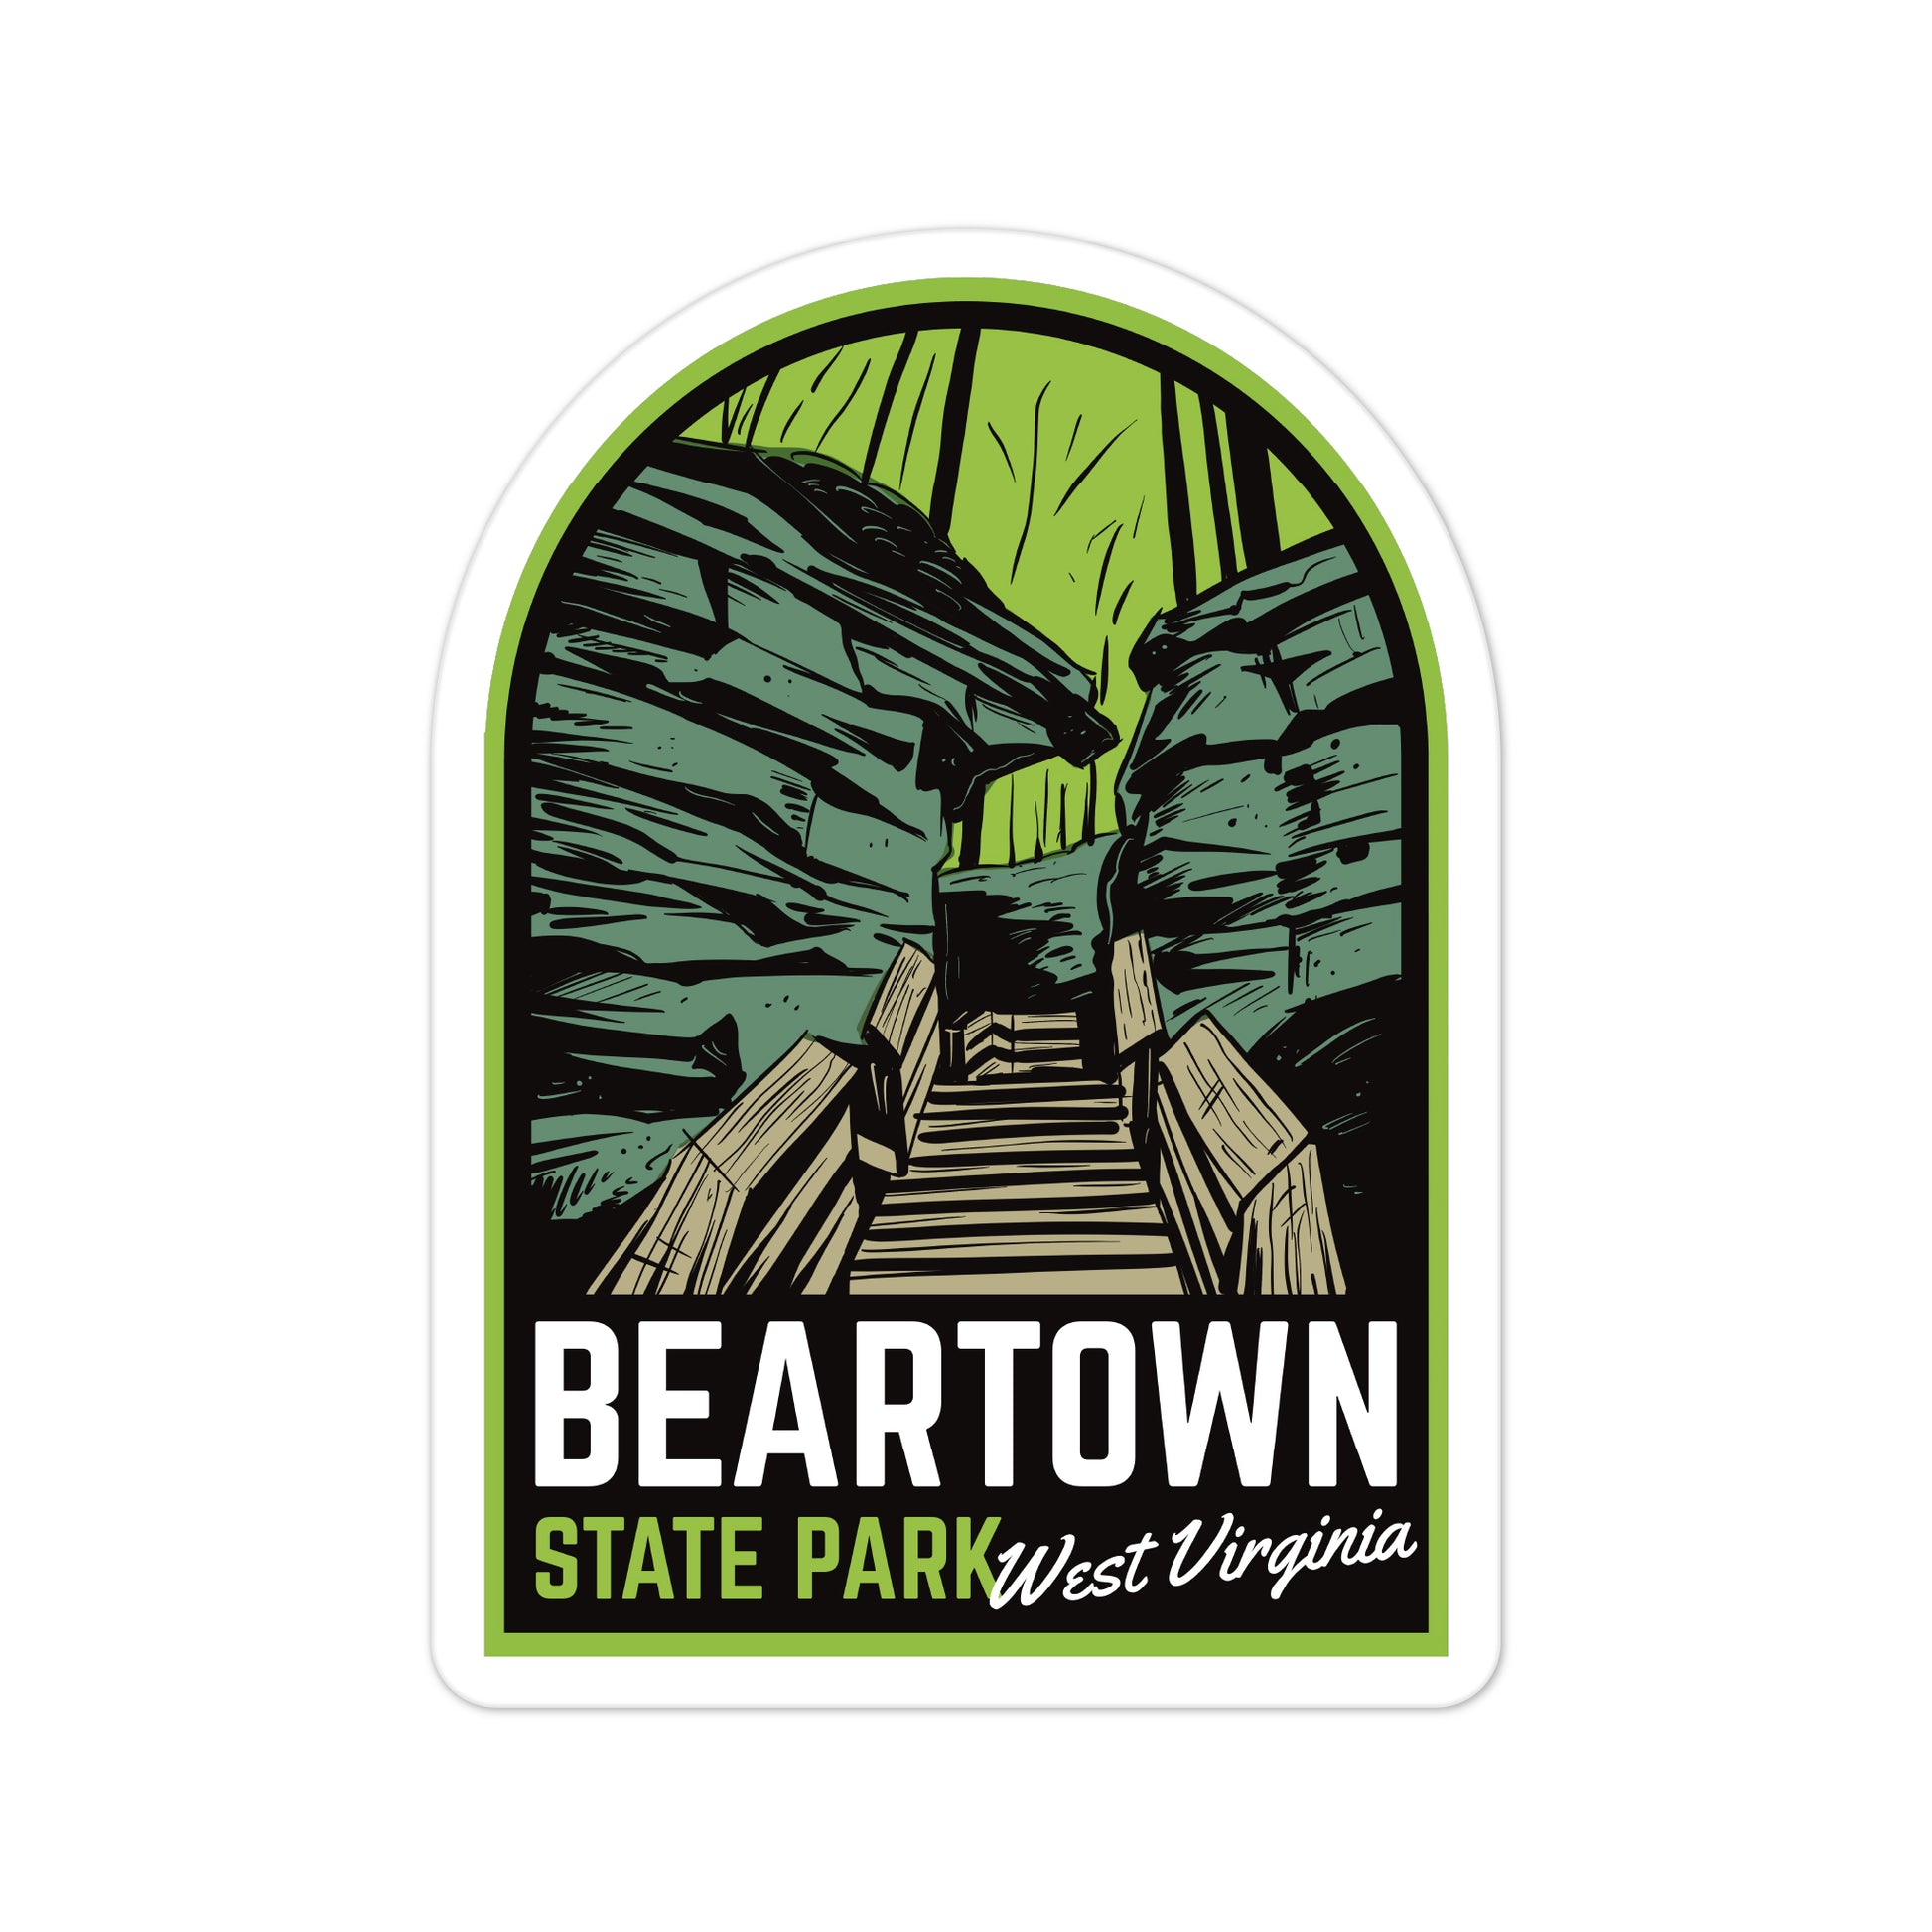 A sticker of Beartown State Park